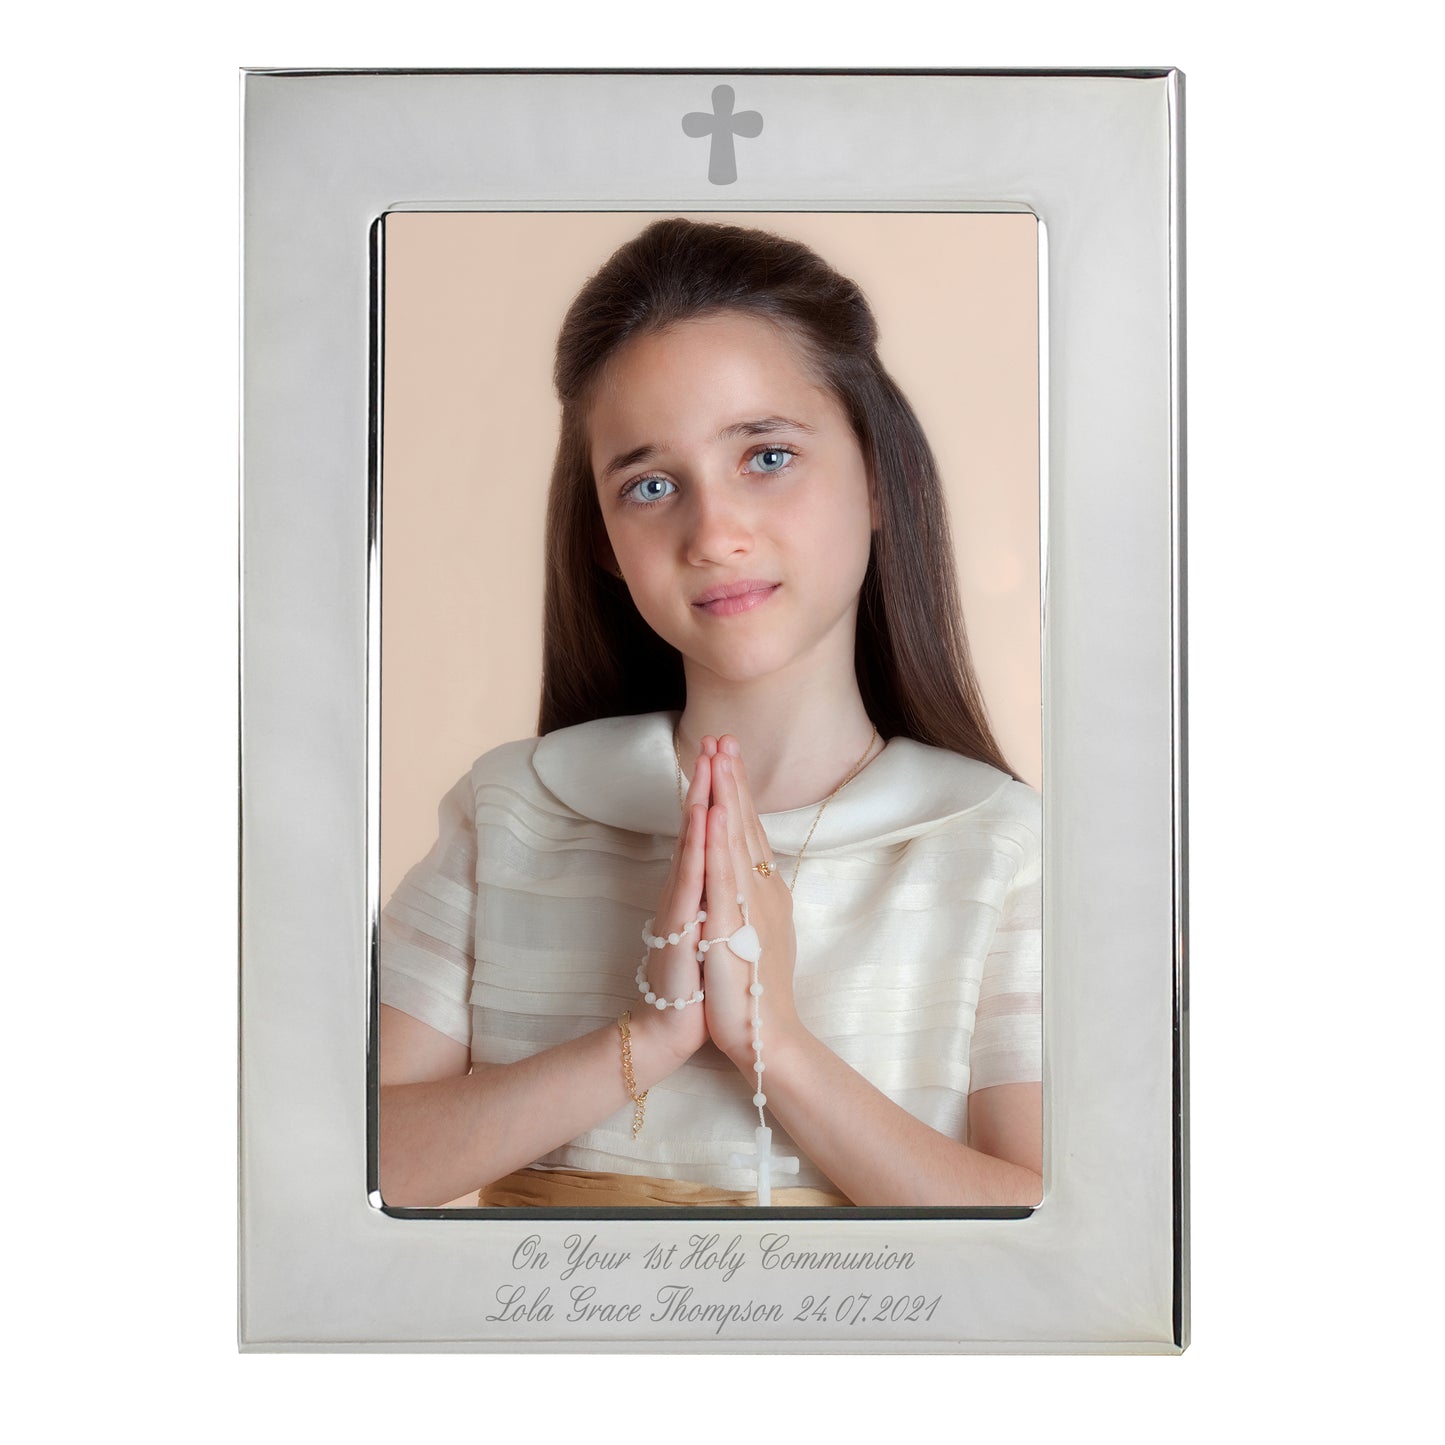 Personalised Silver Plated 5x7 Elegant Cross Photo Frame - Personalise It!